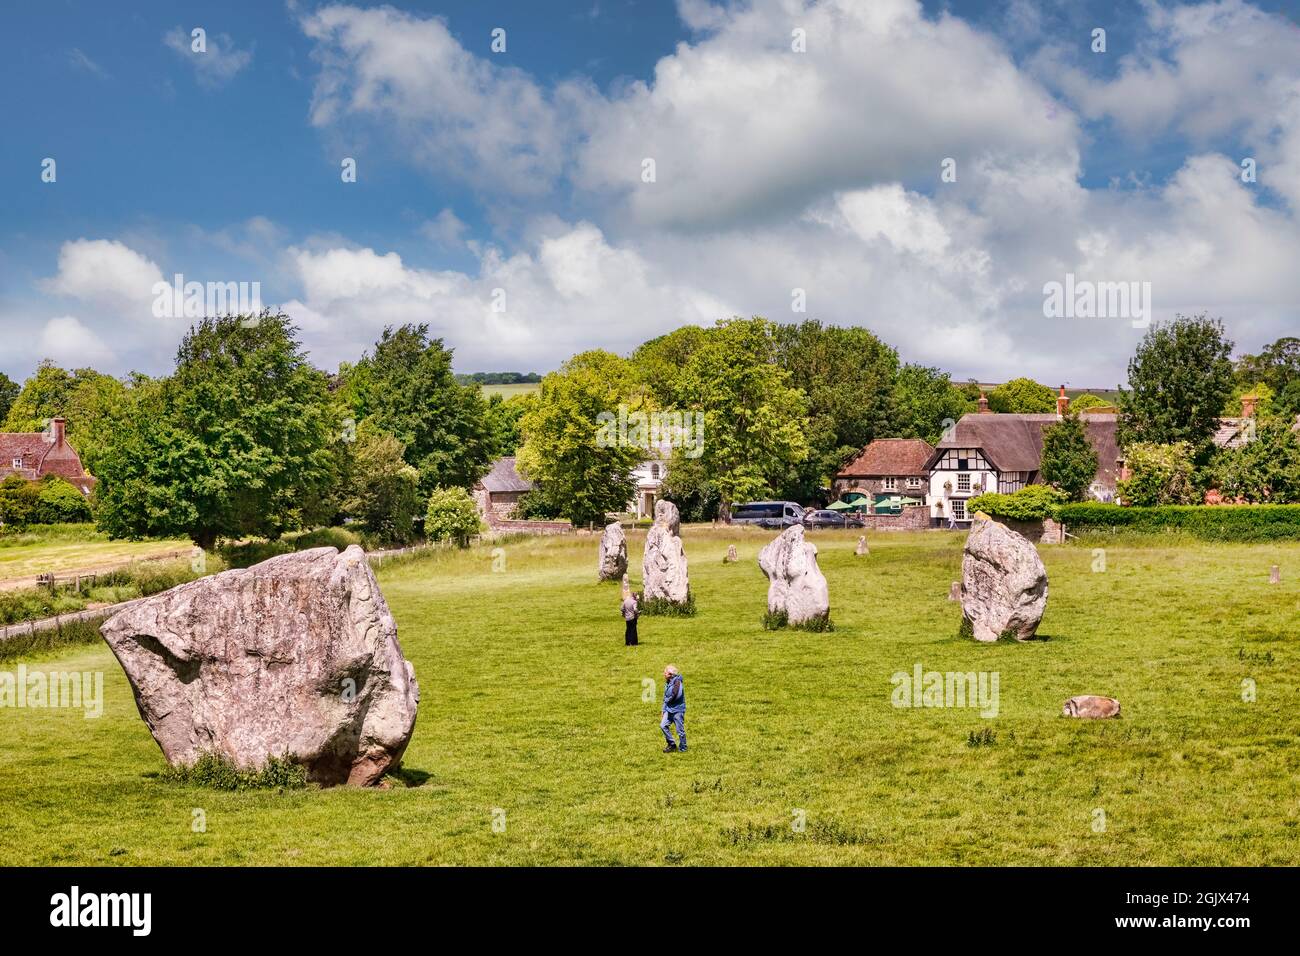 8 June 2019: Avebury, Wiltshire, UK - The stone circle at Avebury, and tourists walking amongst the megaliths, with Avebury village in the backgrond. Stock Photo